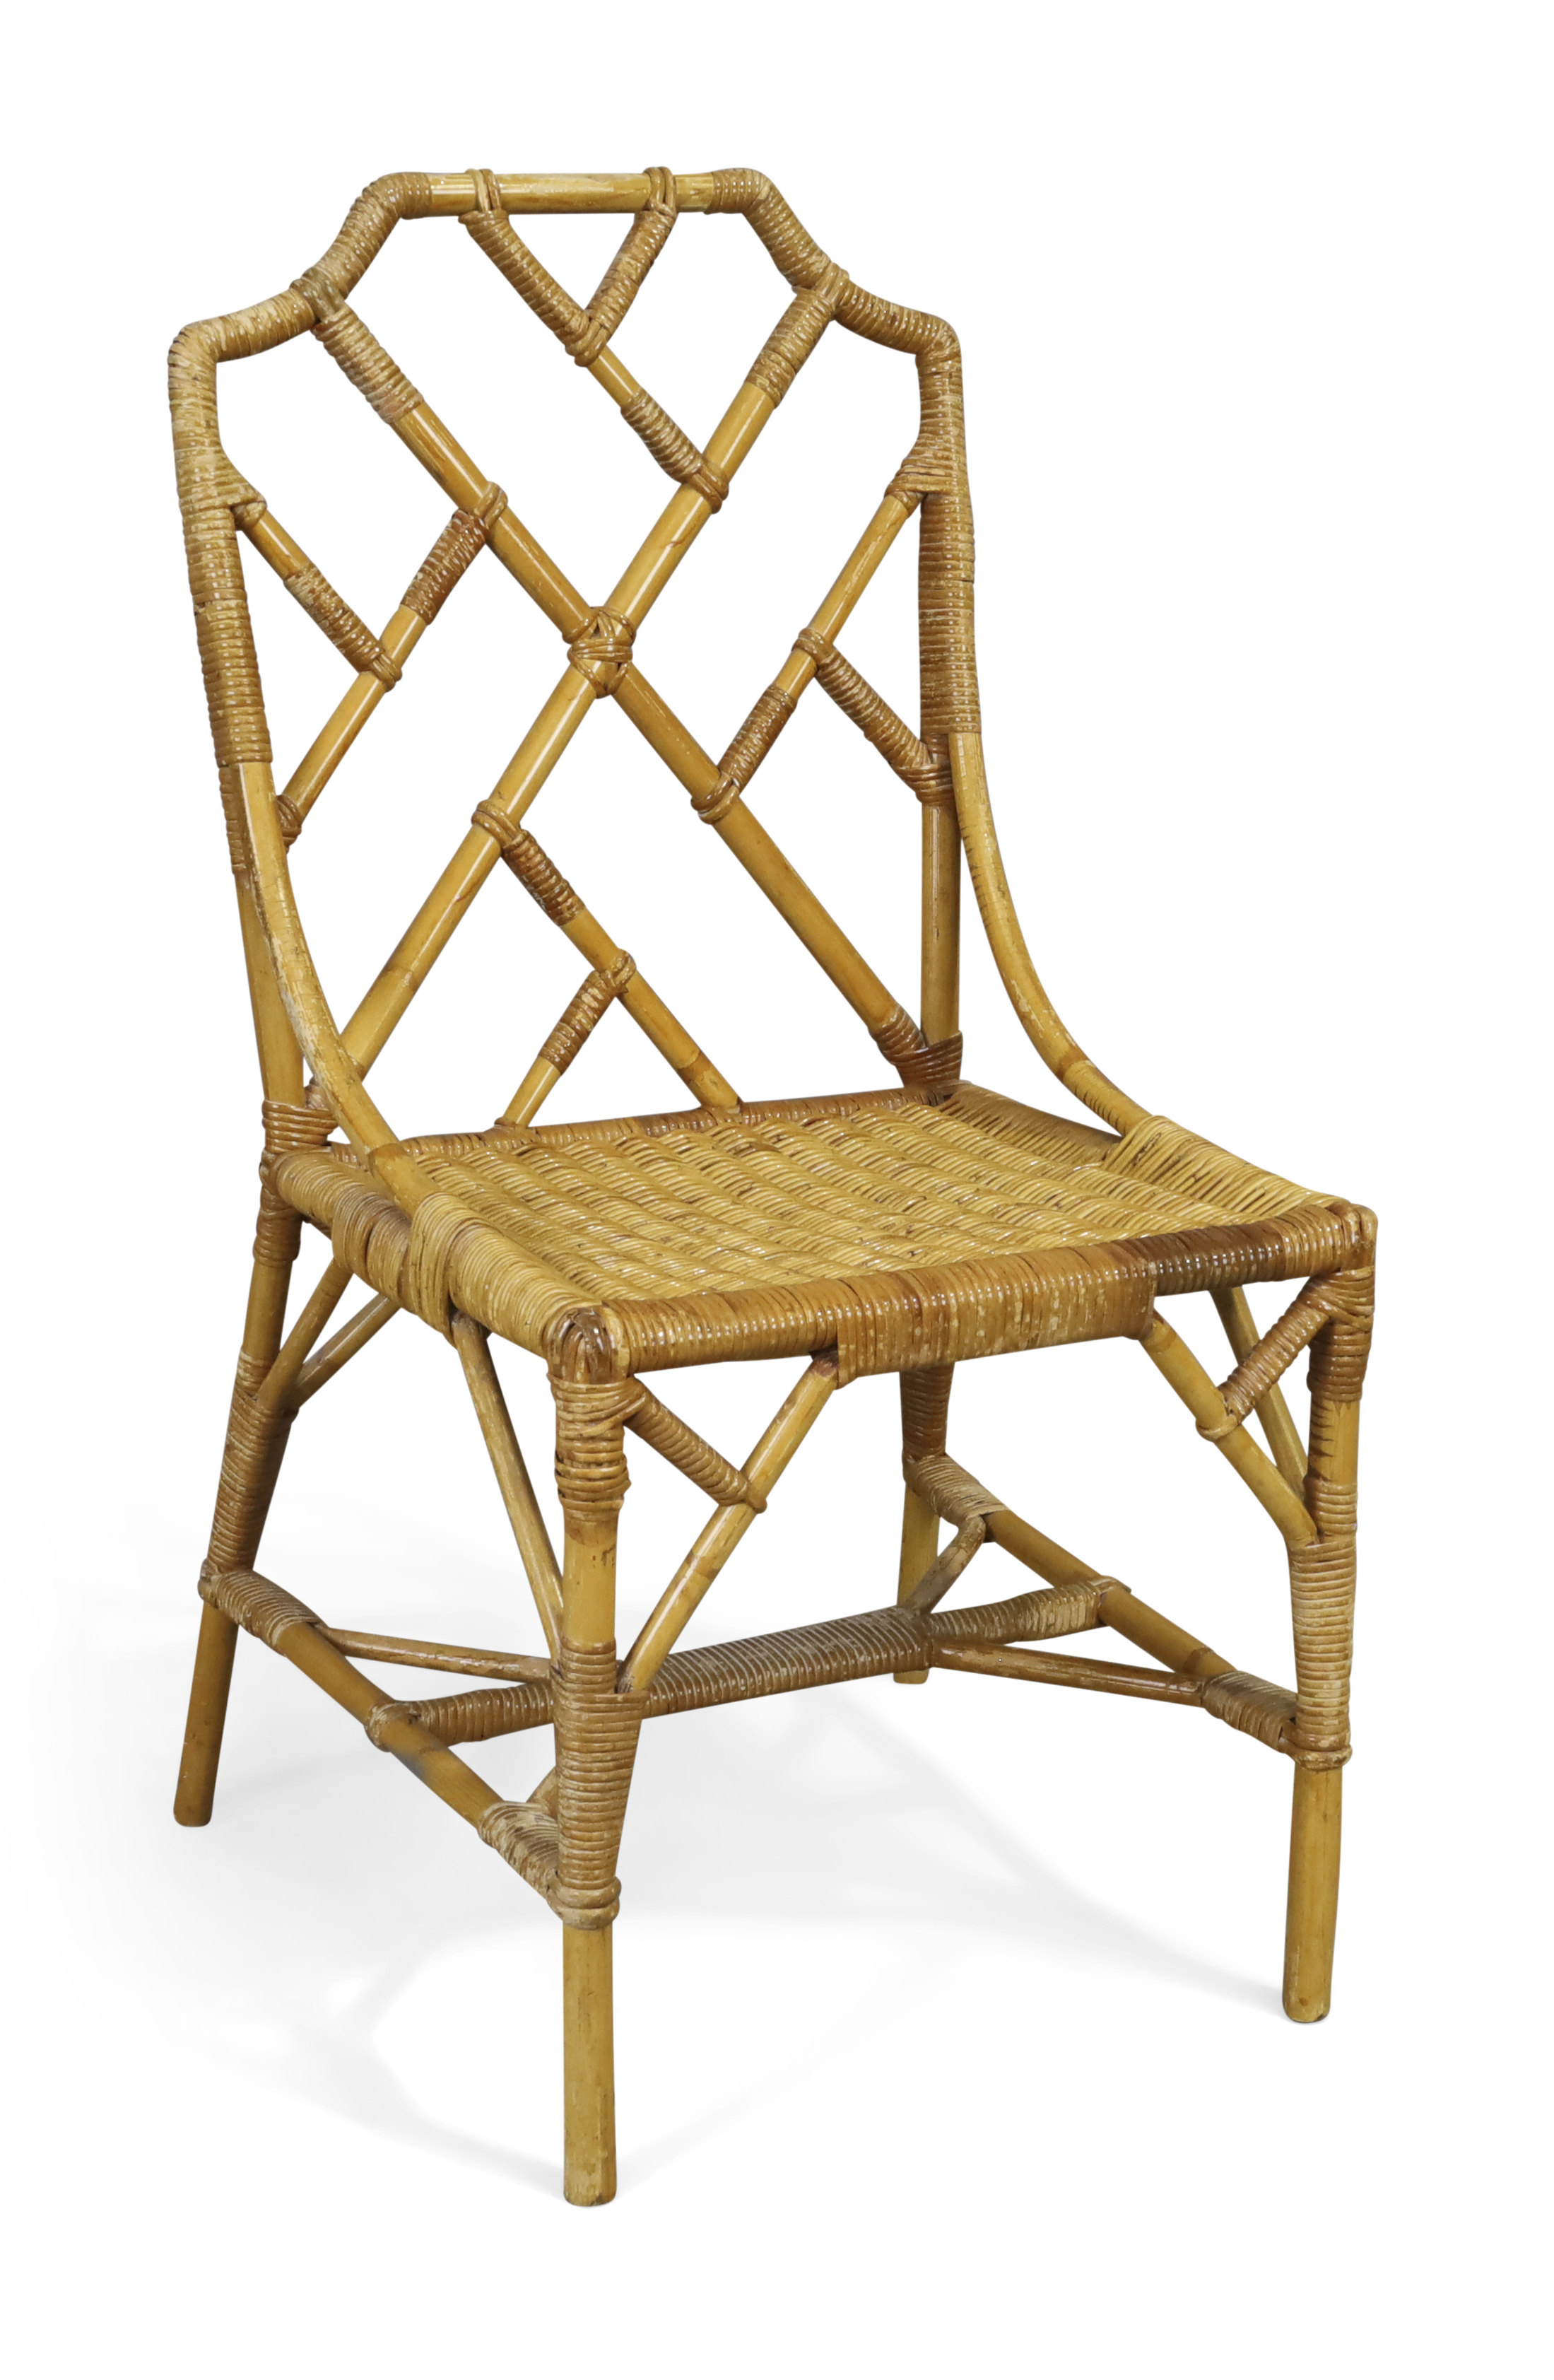 An English bamboo side chair, By Angrave's, mid-20th century, With ‘Cockpen’ back and makers plaq...